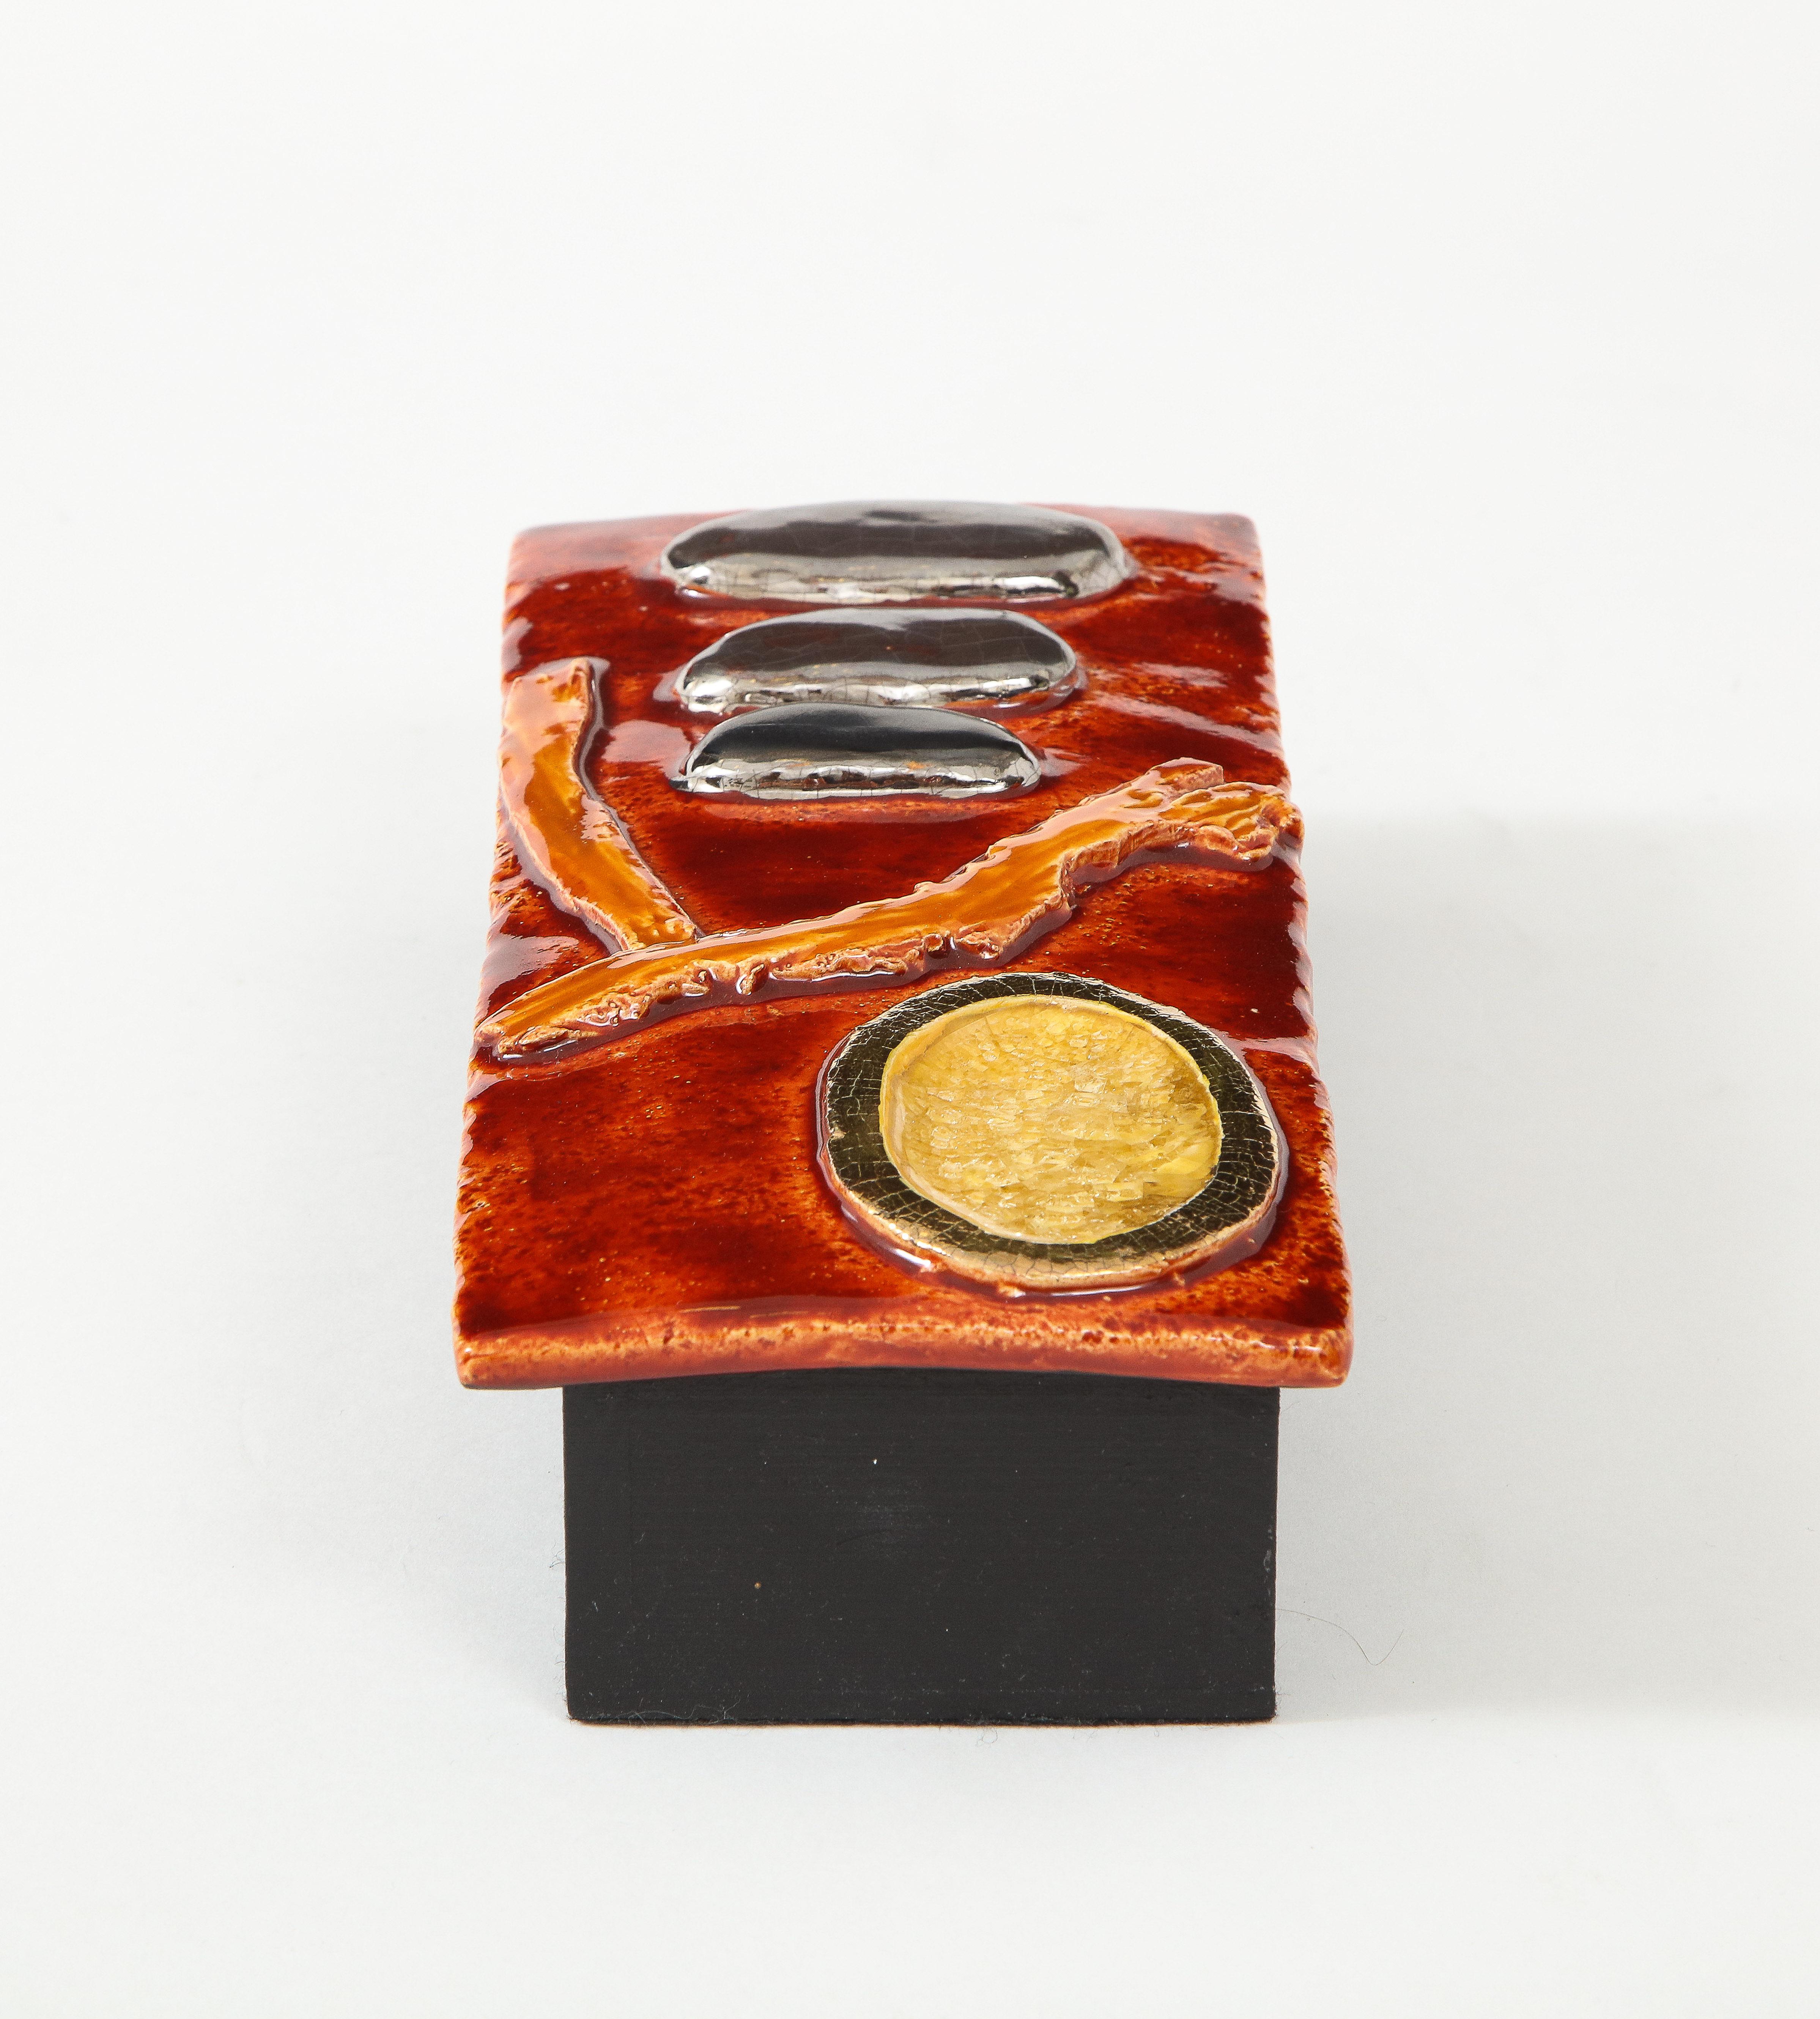 Late 20th Century Enameled Ceramic Box by Marion De Crecy, France, circa 1975